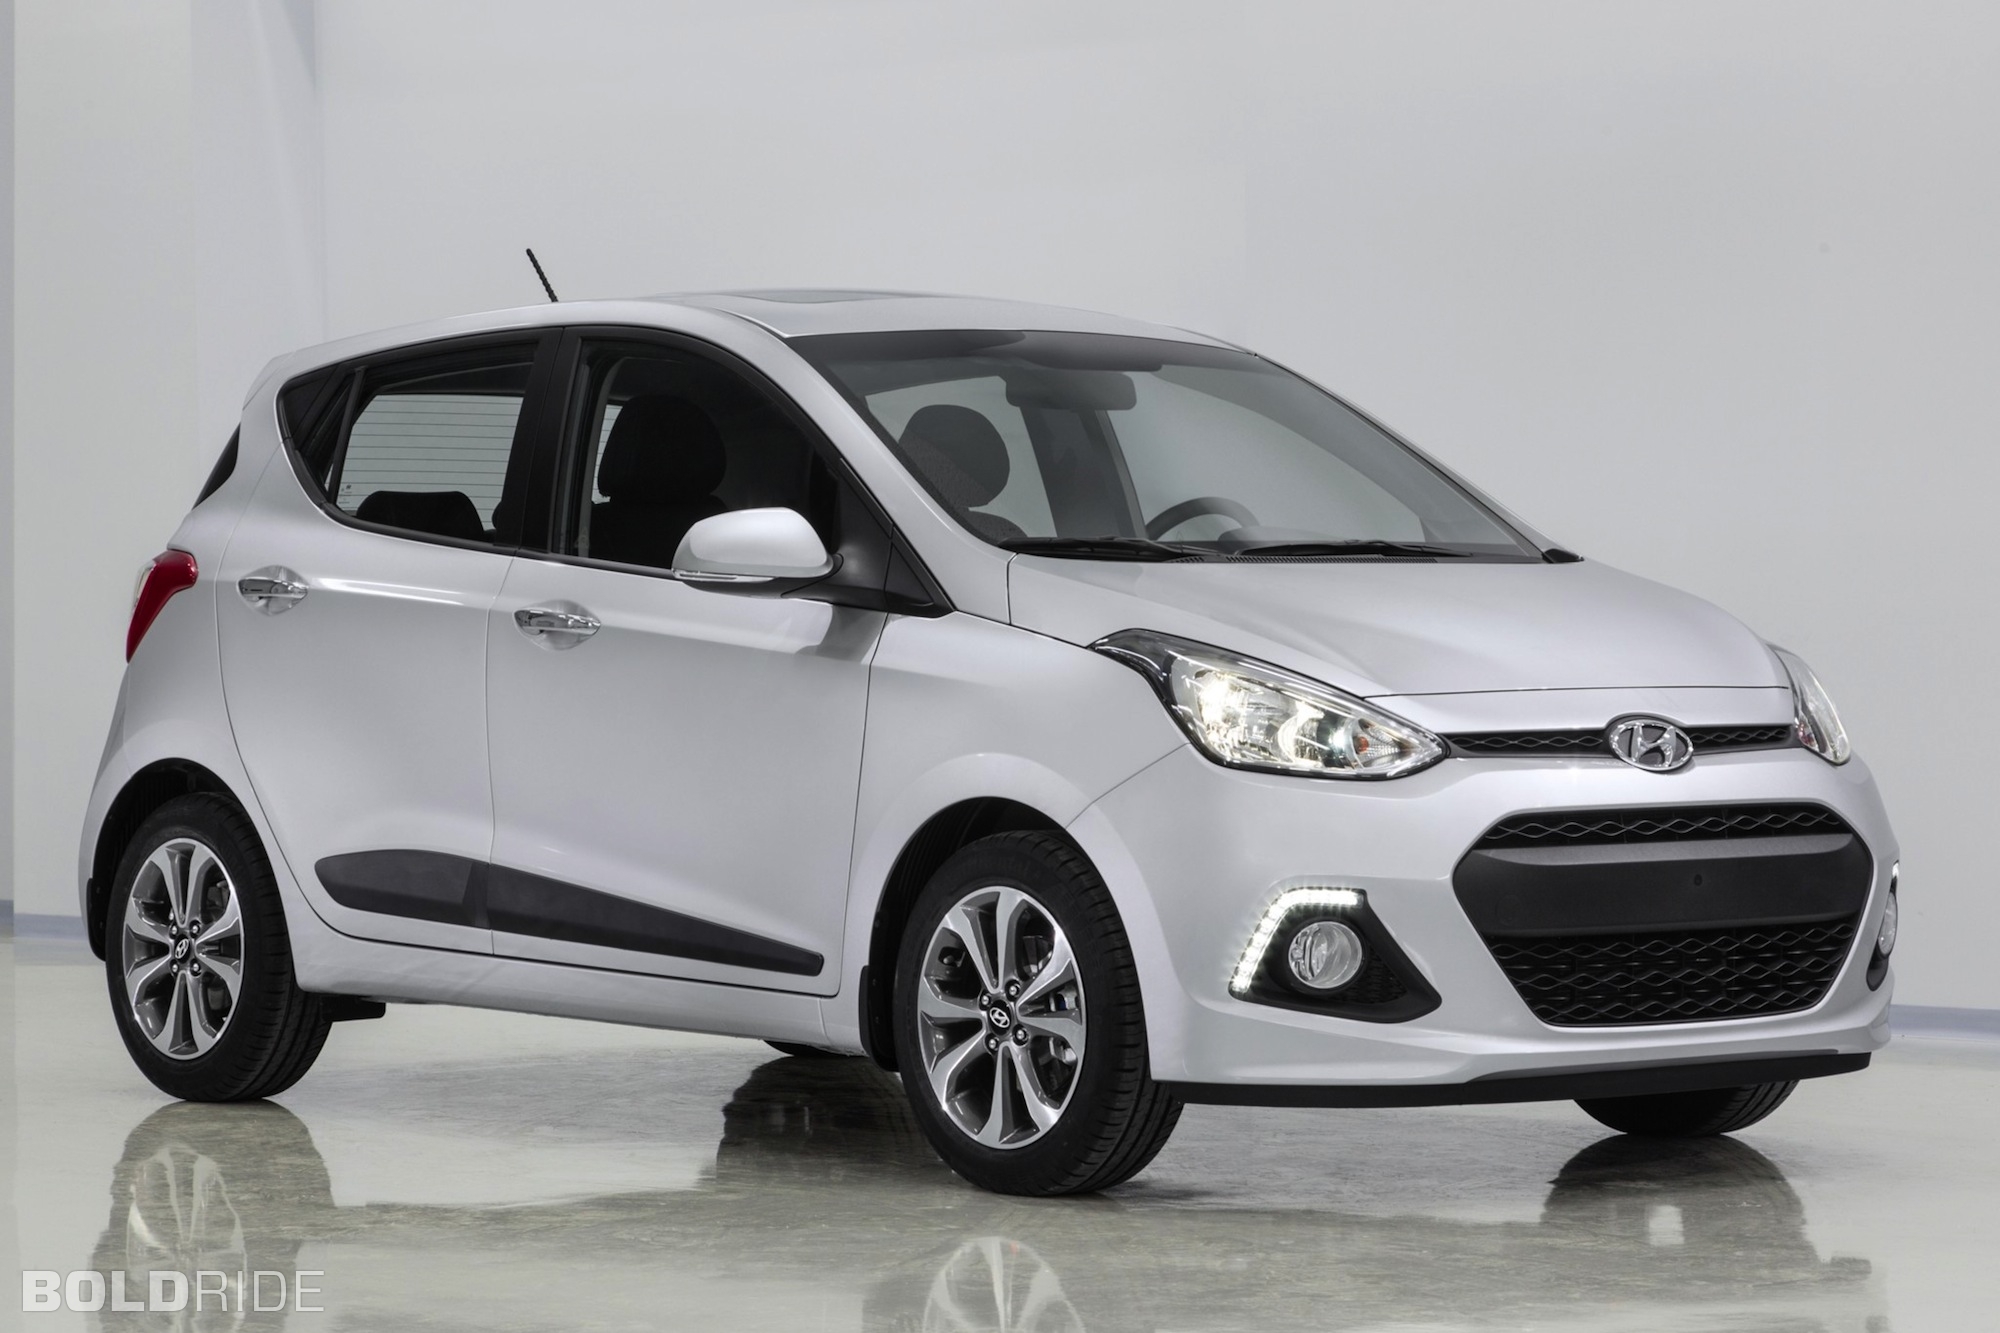 2014 Hyundai i10 Images Pictures and Videos